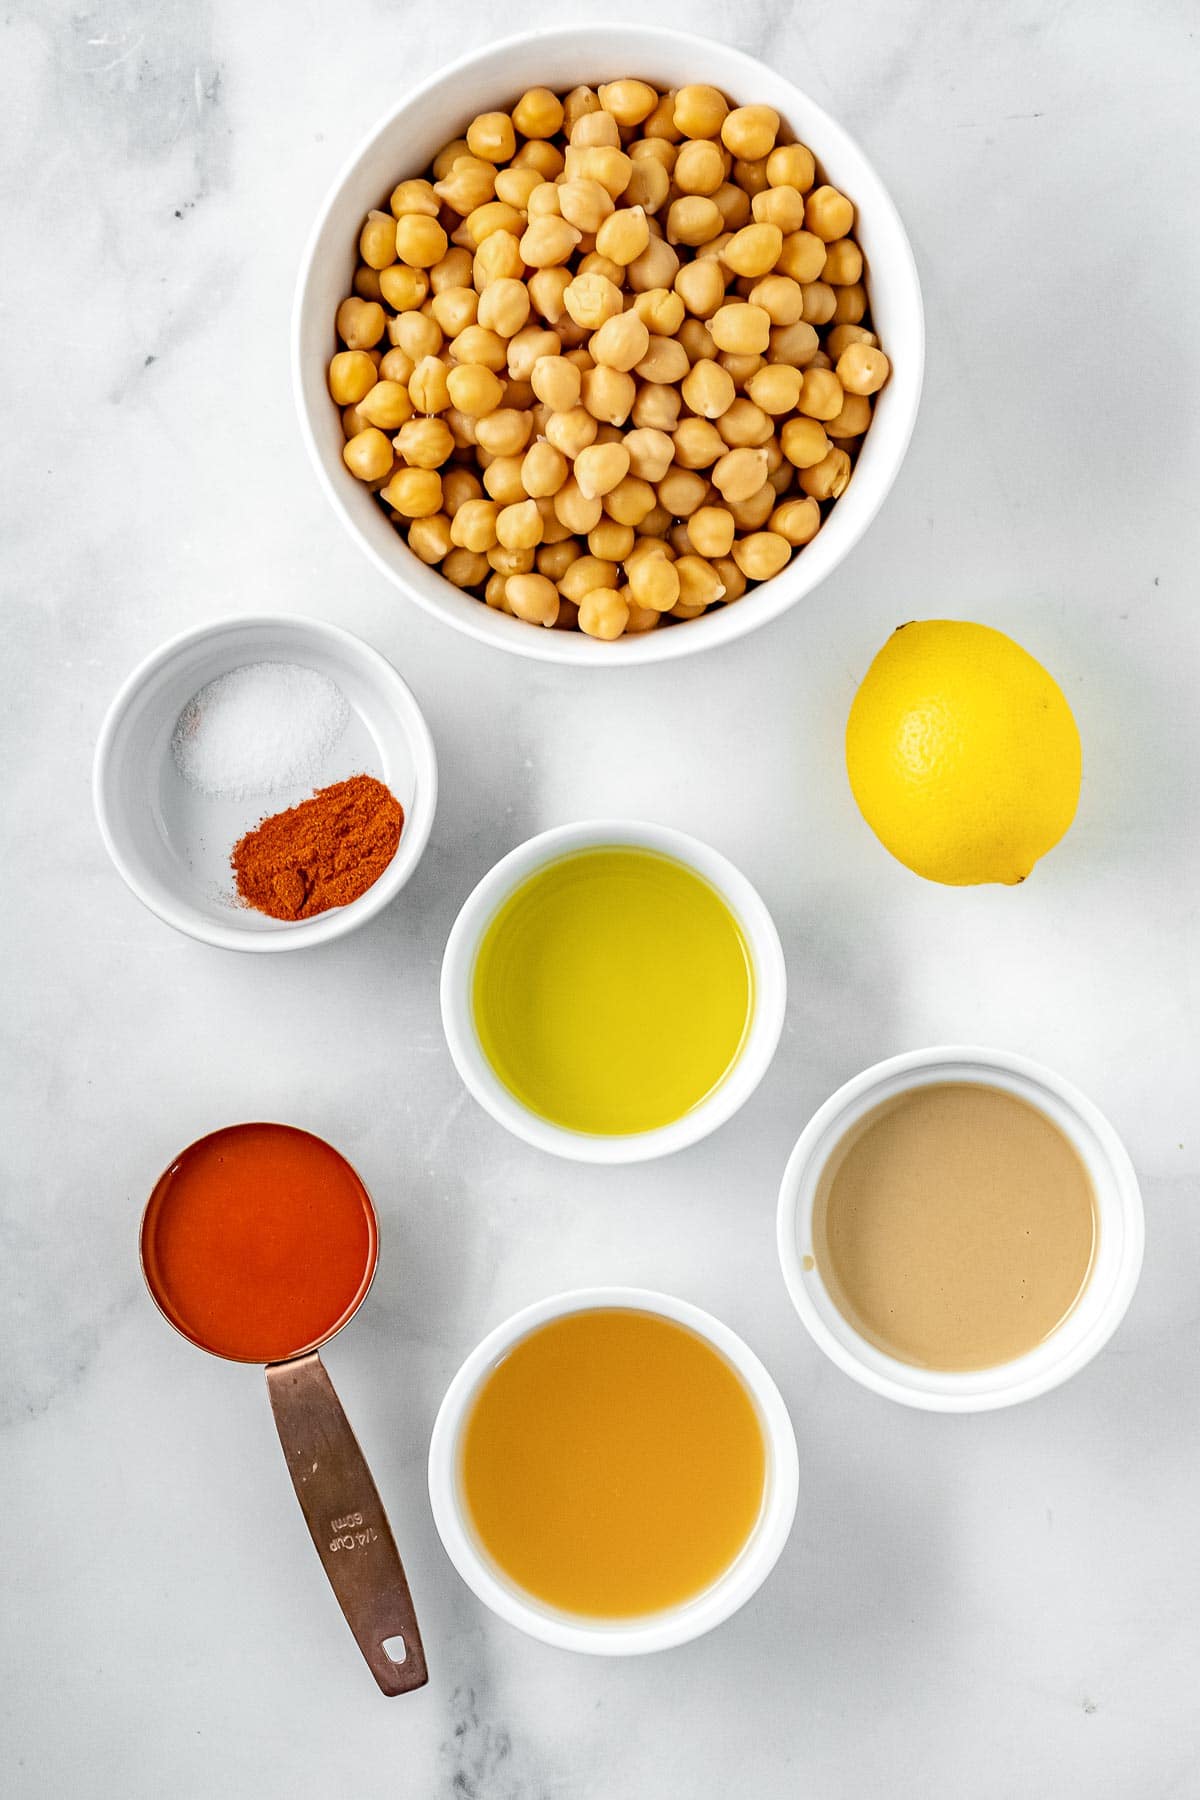 several white bowls full of ingredients for hummus - chickpeas, lemon, buffalo sauce, chickpea liquid, olive oil and spices